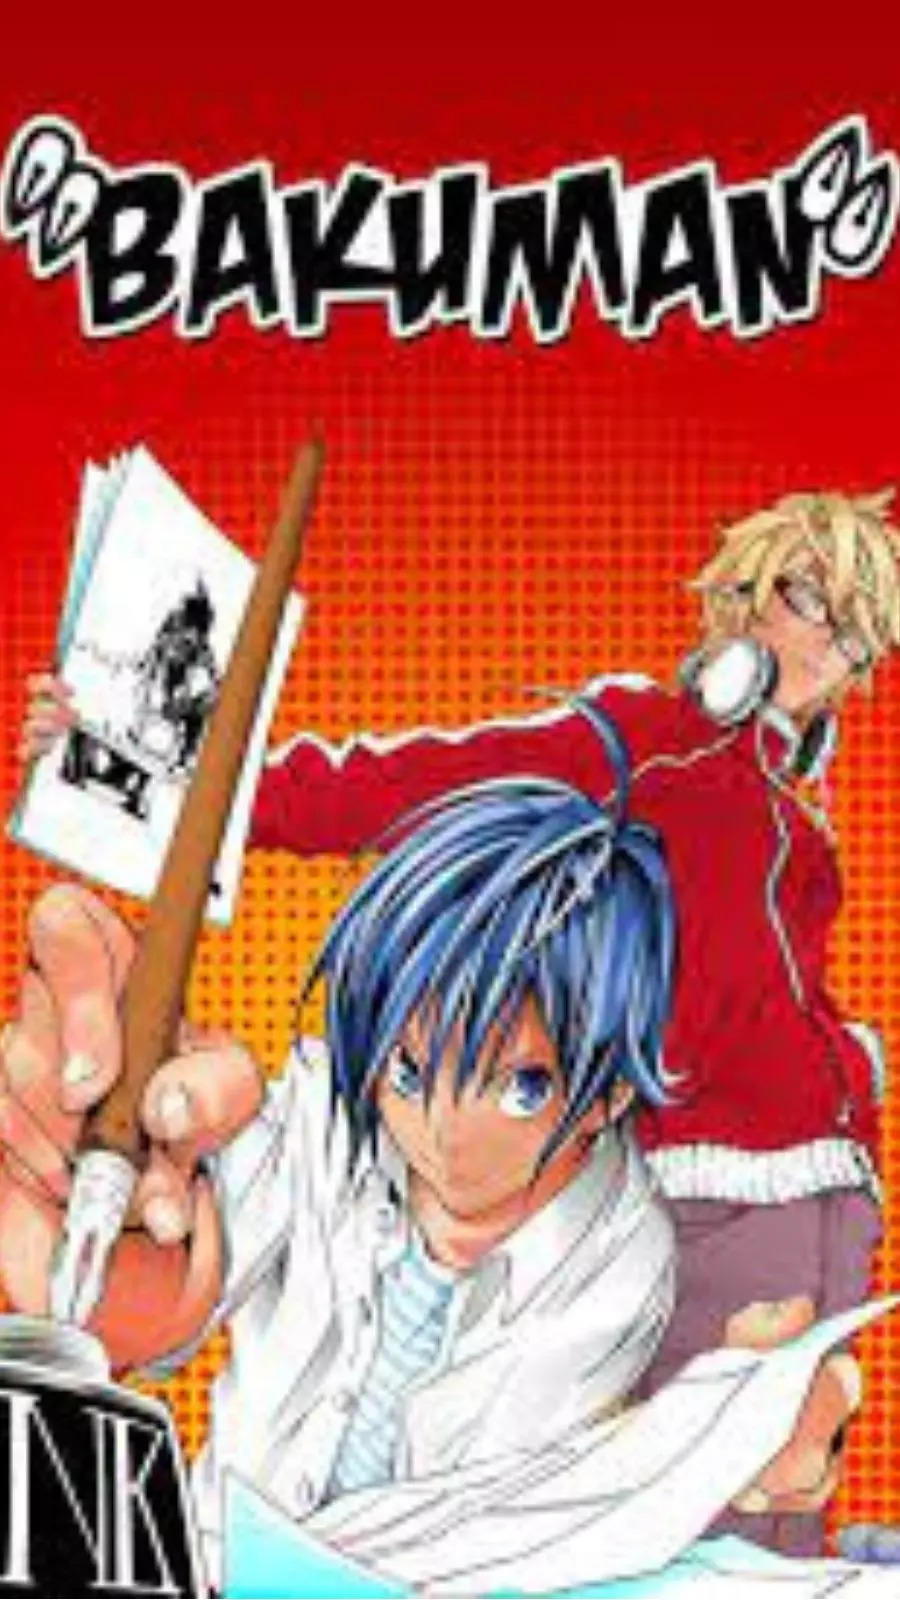 List of All Bakuman Anime Characters, Ranked Best to Worst